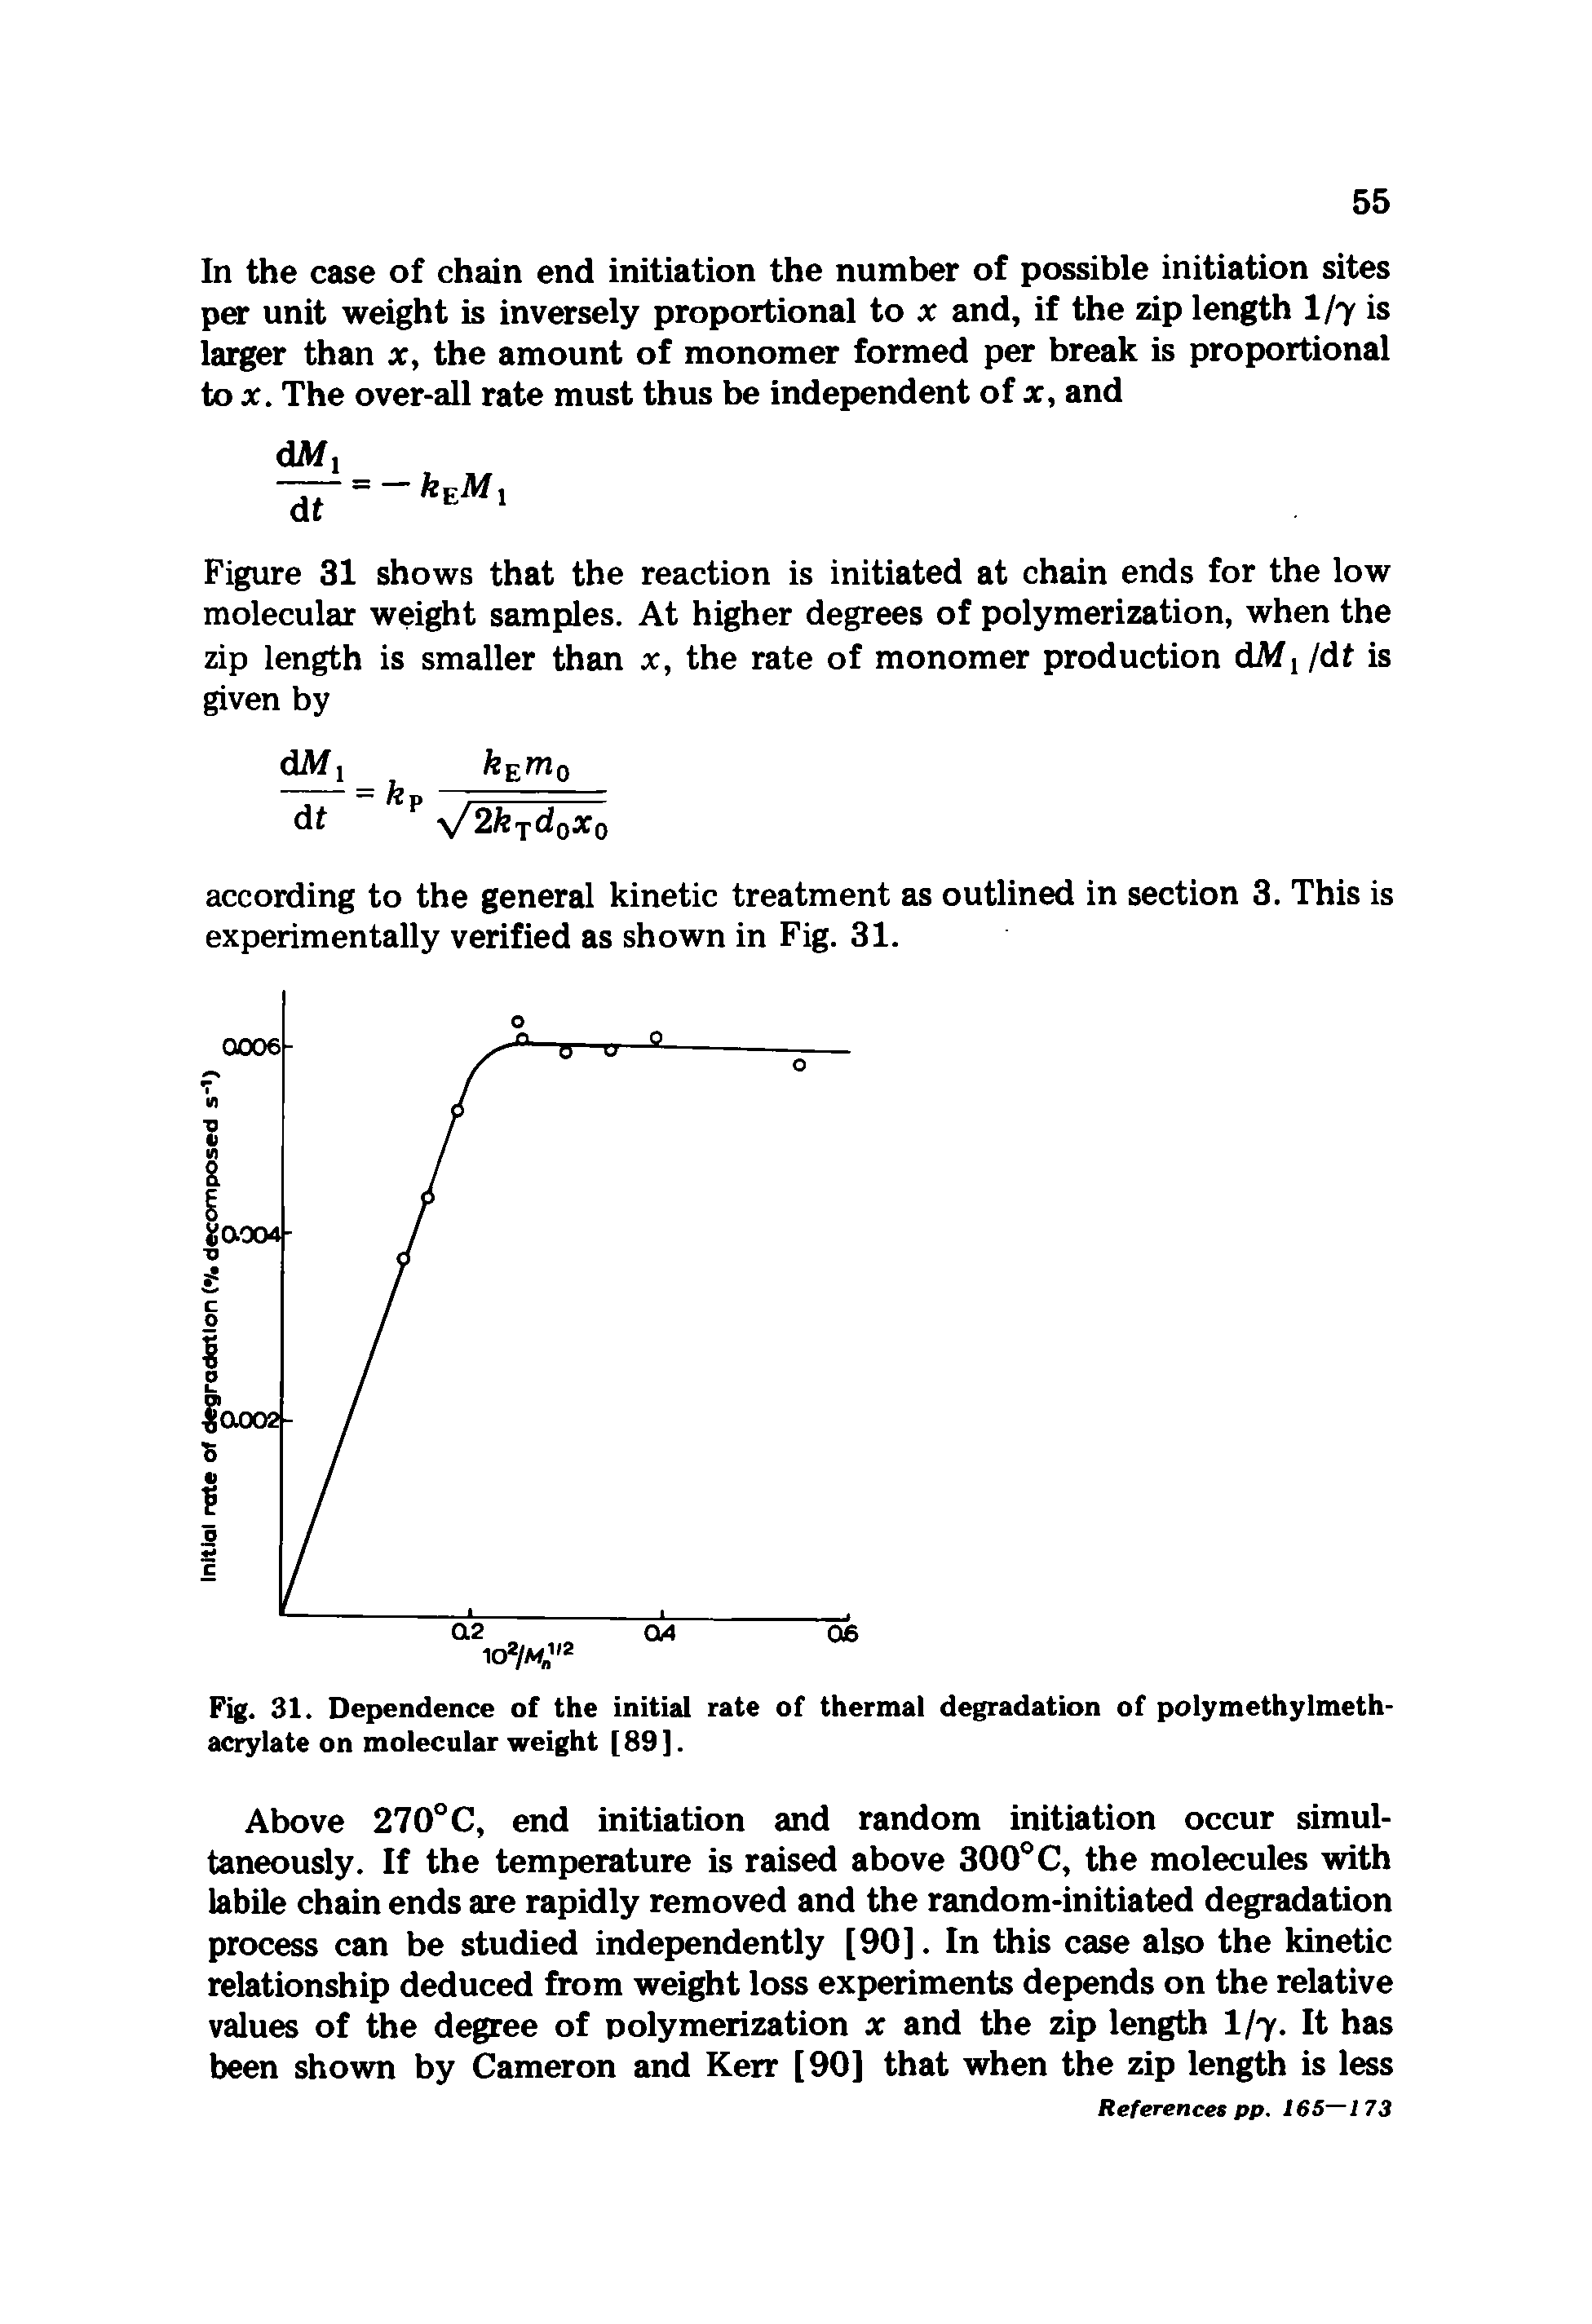 Fig. 31. Dependence of the initial rate of thermal degradation of polymethylmethacrylate on molecular weight [89].